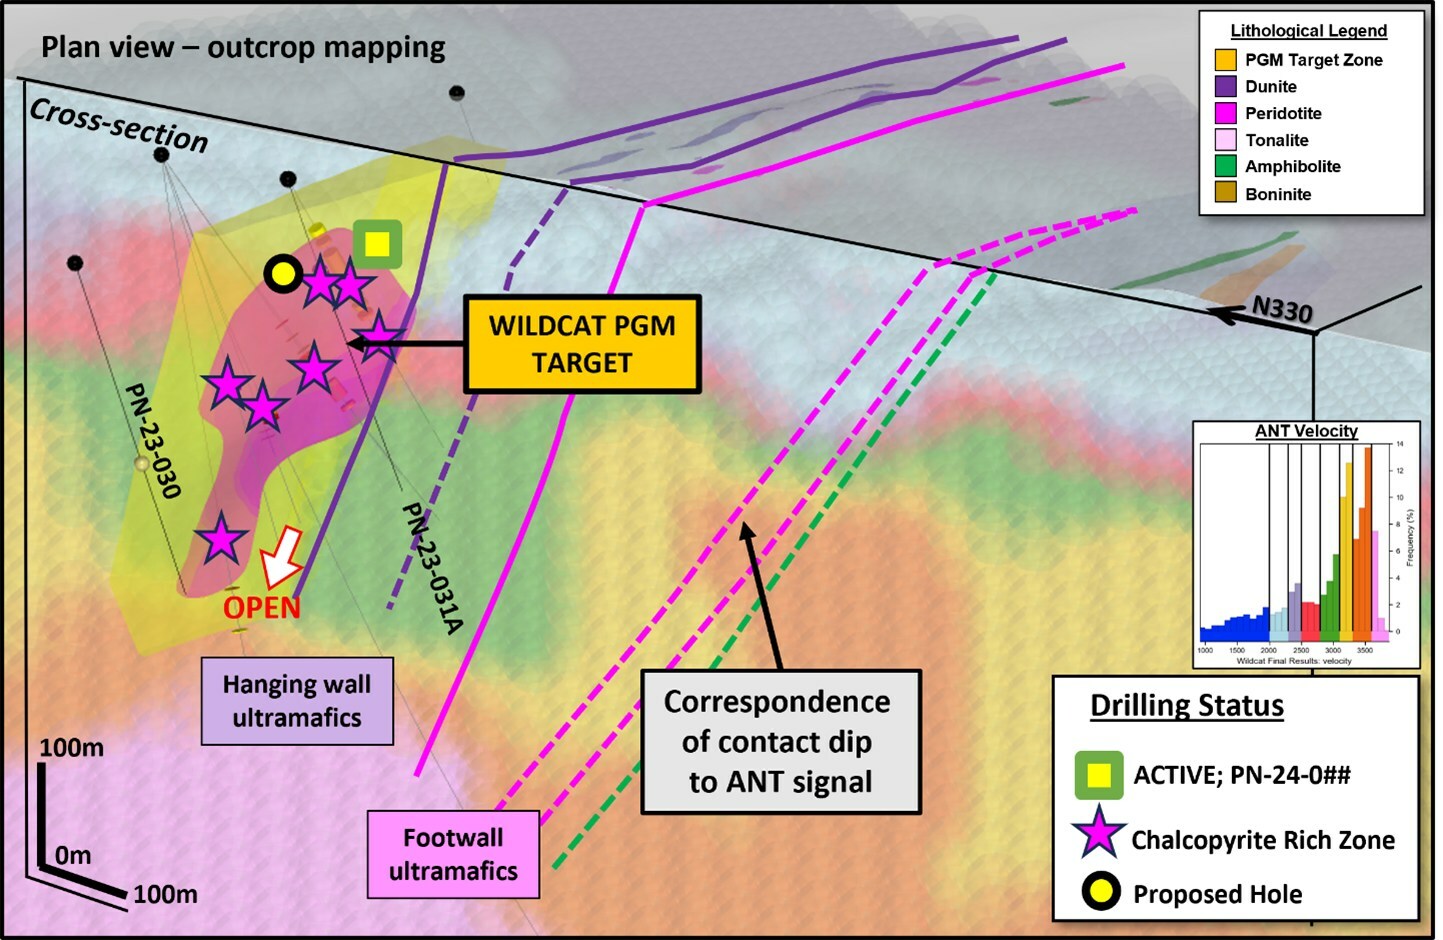 Figure 3: 3D view showing both outcrop mapping and the interpreted mineralized envelope (yellow) and semi-massive chalcopyrite core (magenta), against the Fleet ANT survey.